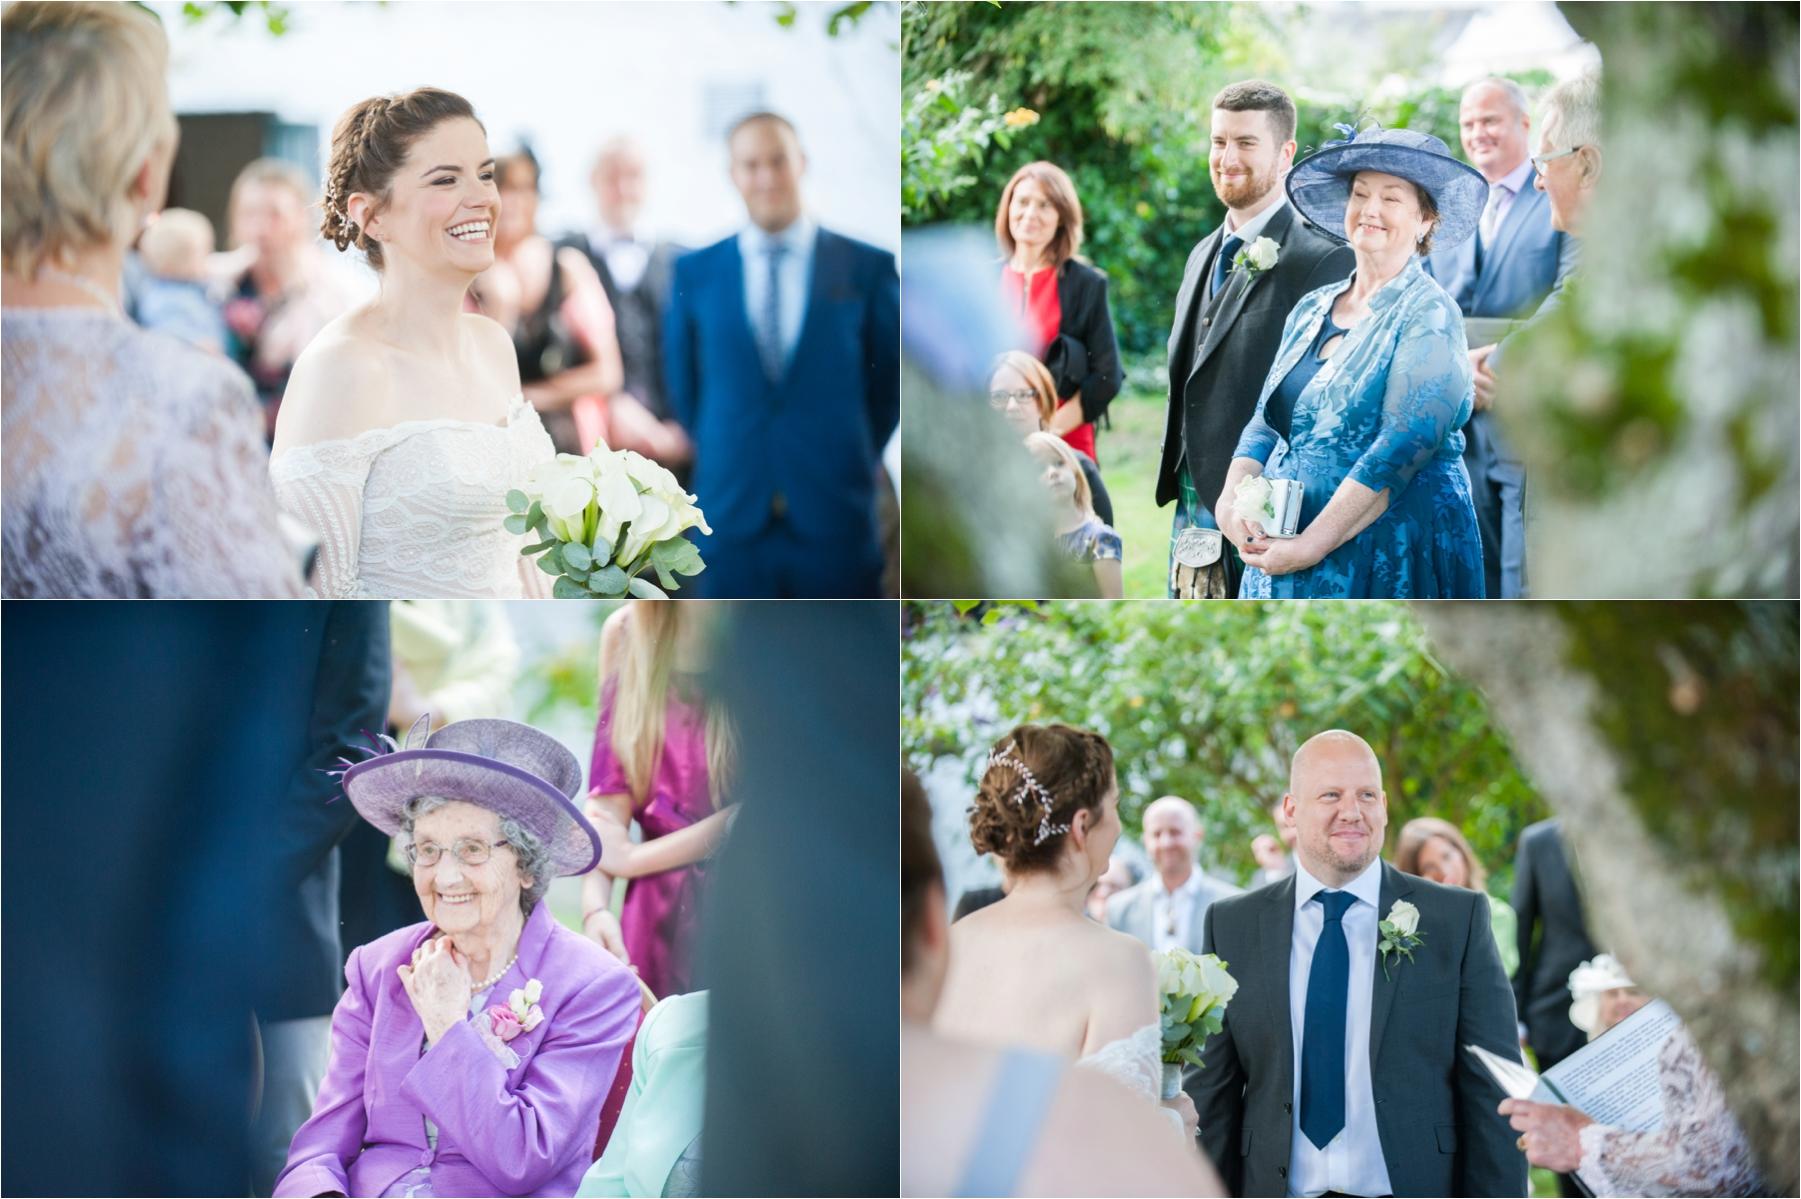 getting married at outdoor wedding scottish Highland photography